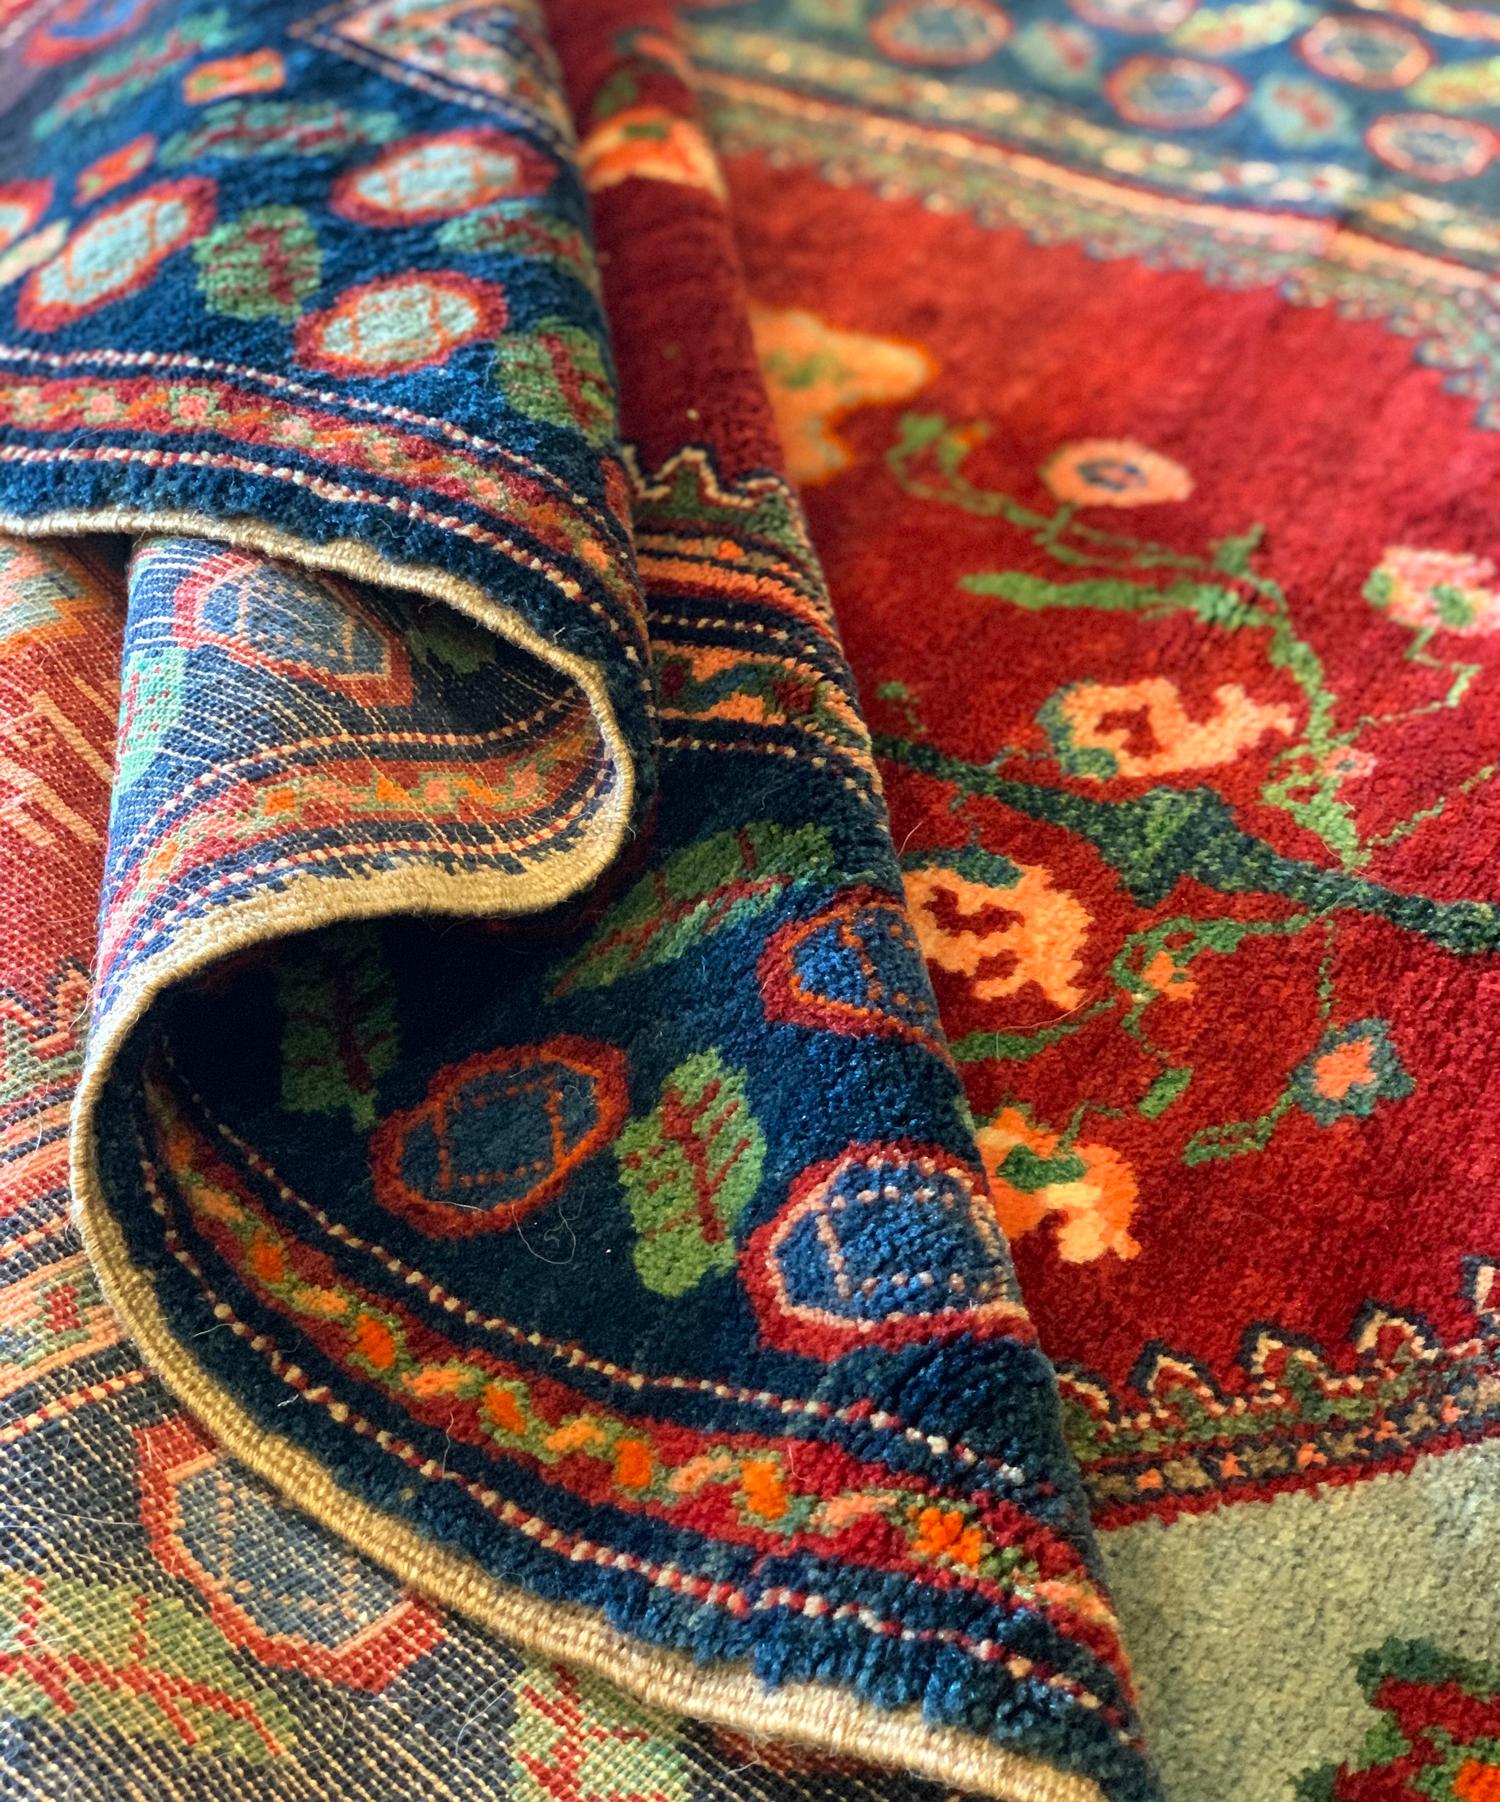 Antique Rugs Armenian Carpet, Handwoven Blue Red Wool Area Rug In Excellent Condition For Sale In Hampshire, GB